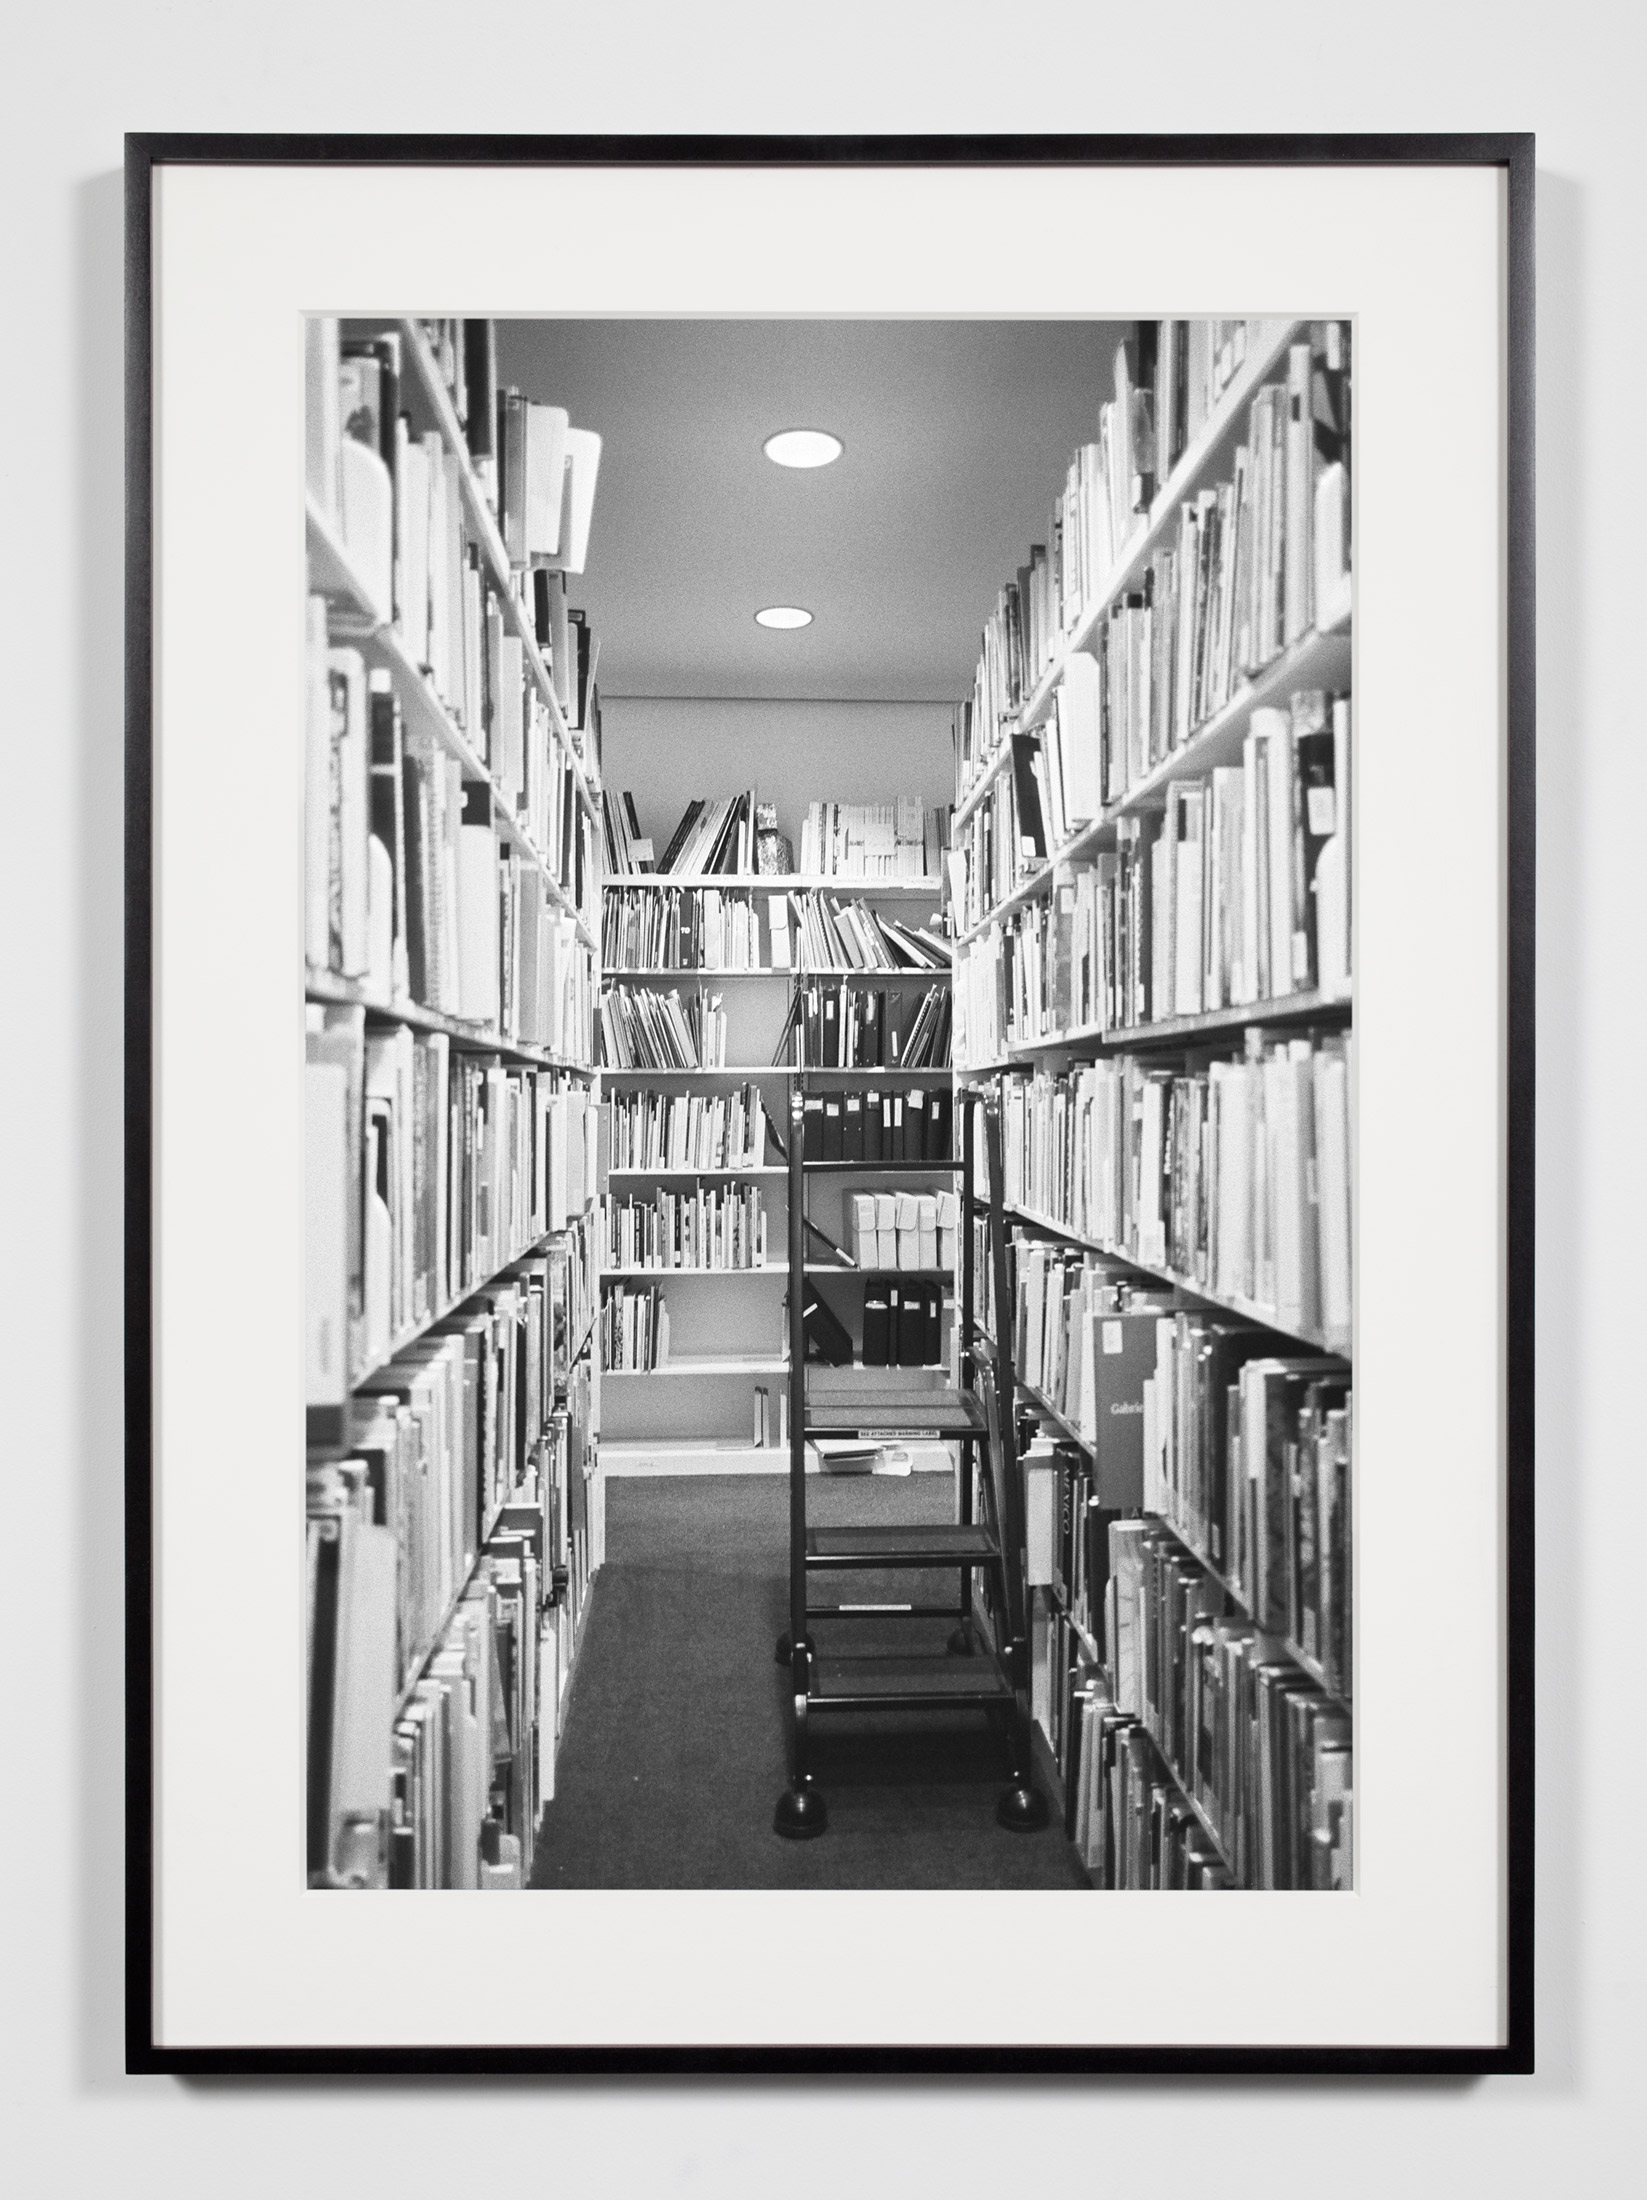   Museum Library Stacks, Washington, District of Columbia, August 18, 2008   2011  Epson Ultrachrome K3 archival ink jet print on Hahnemühle Photo Rag paper  36 3/8 x 26 3/8 inches   Industrial Portraits, 2008–    A Diagram of Forces, 2011     